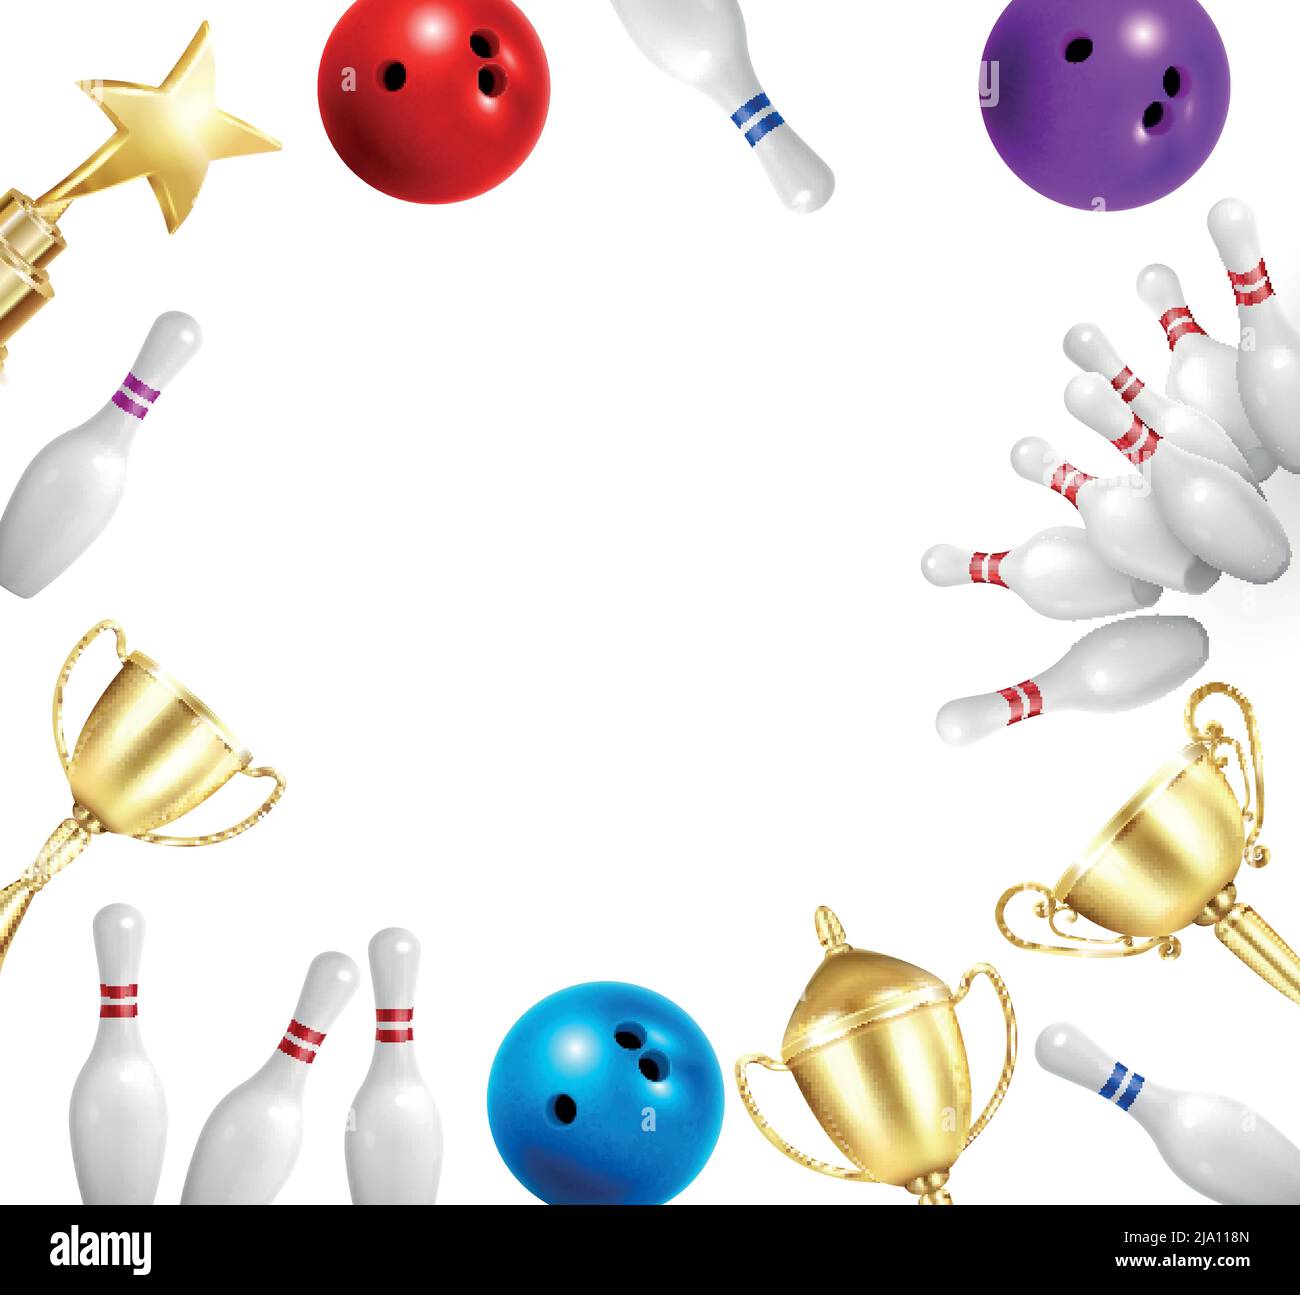 Bowling realistic frame composition with pins balls and golden cup star award images surrounding empty space vector illustration Stock Vector